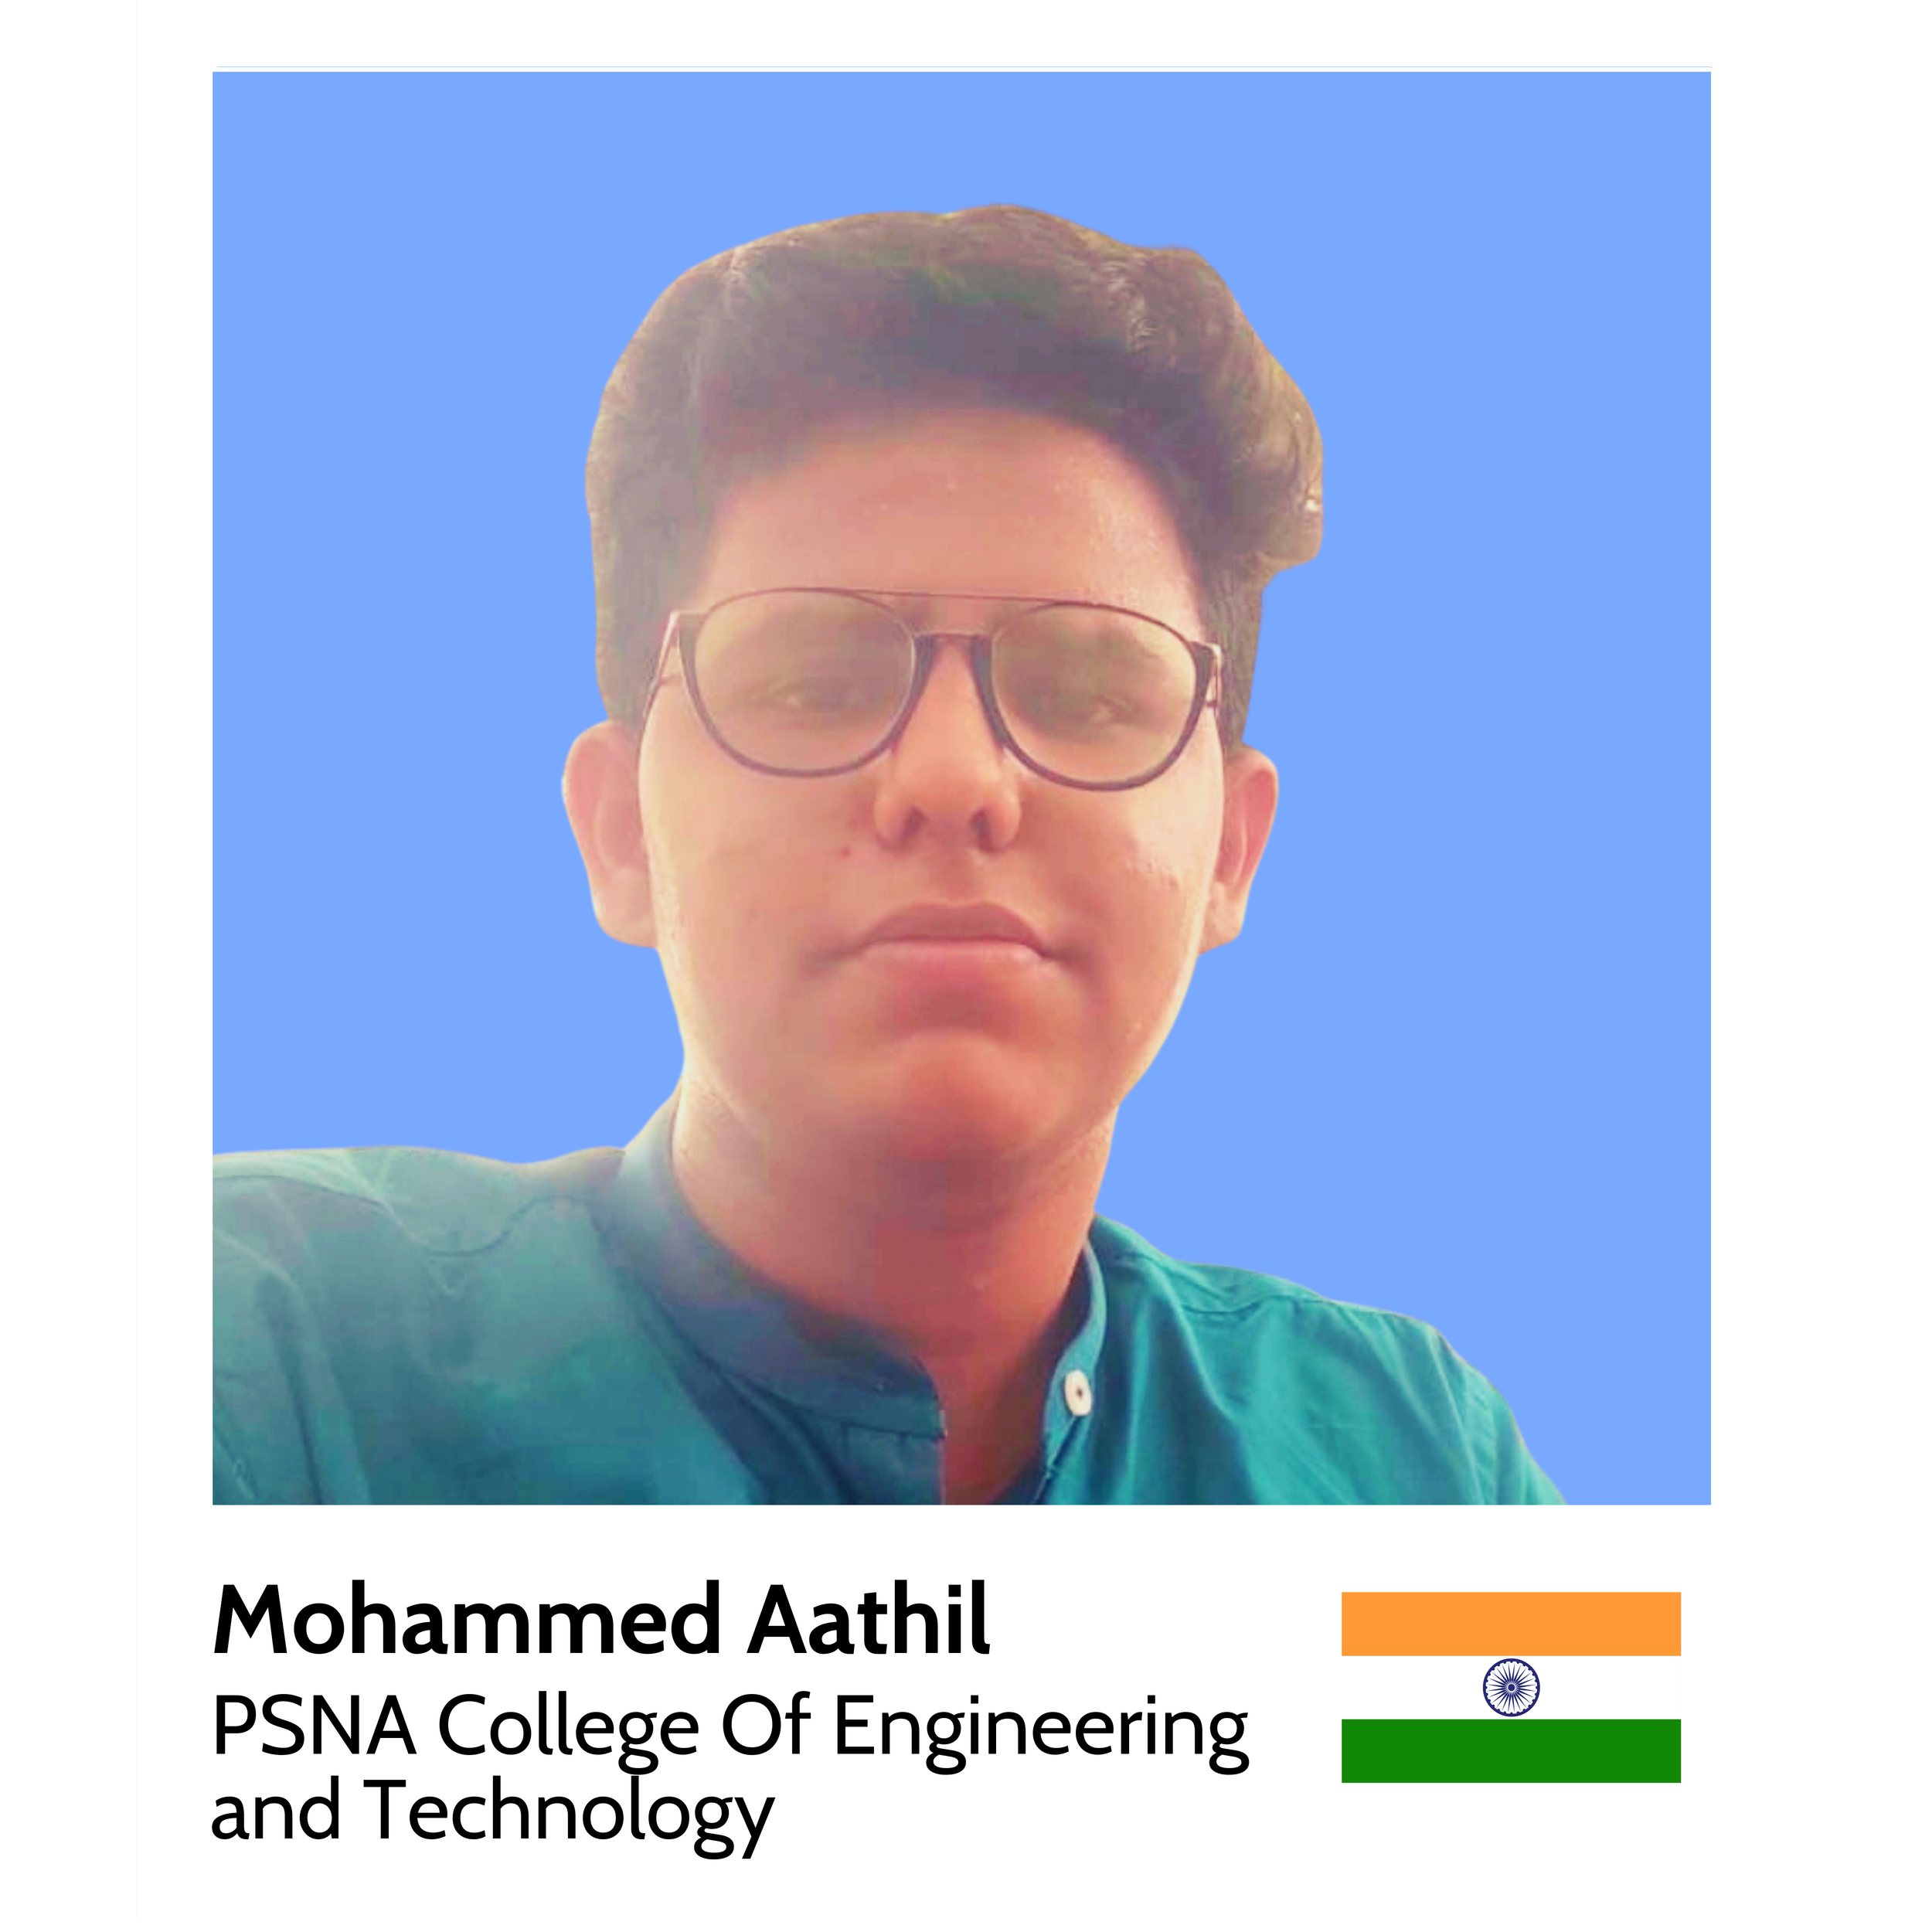 Your_Big_Year_ibm_zsystems_ambassador_Mohammed_aathil_PSNA_College_Of_Engineering_And_Technology.png